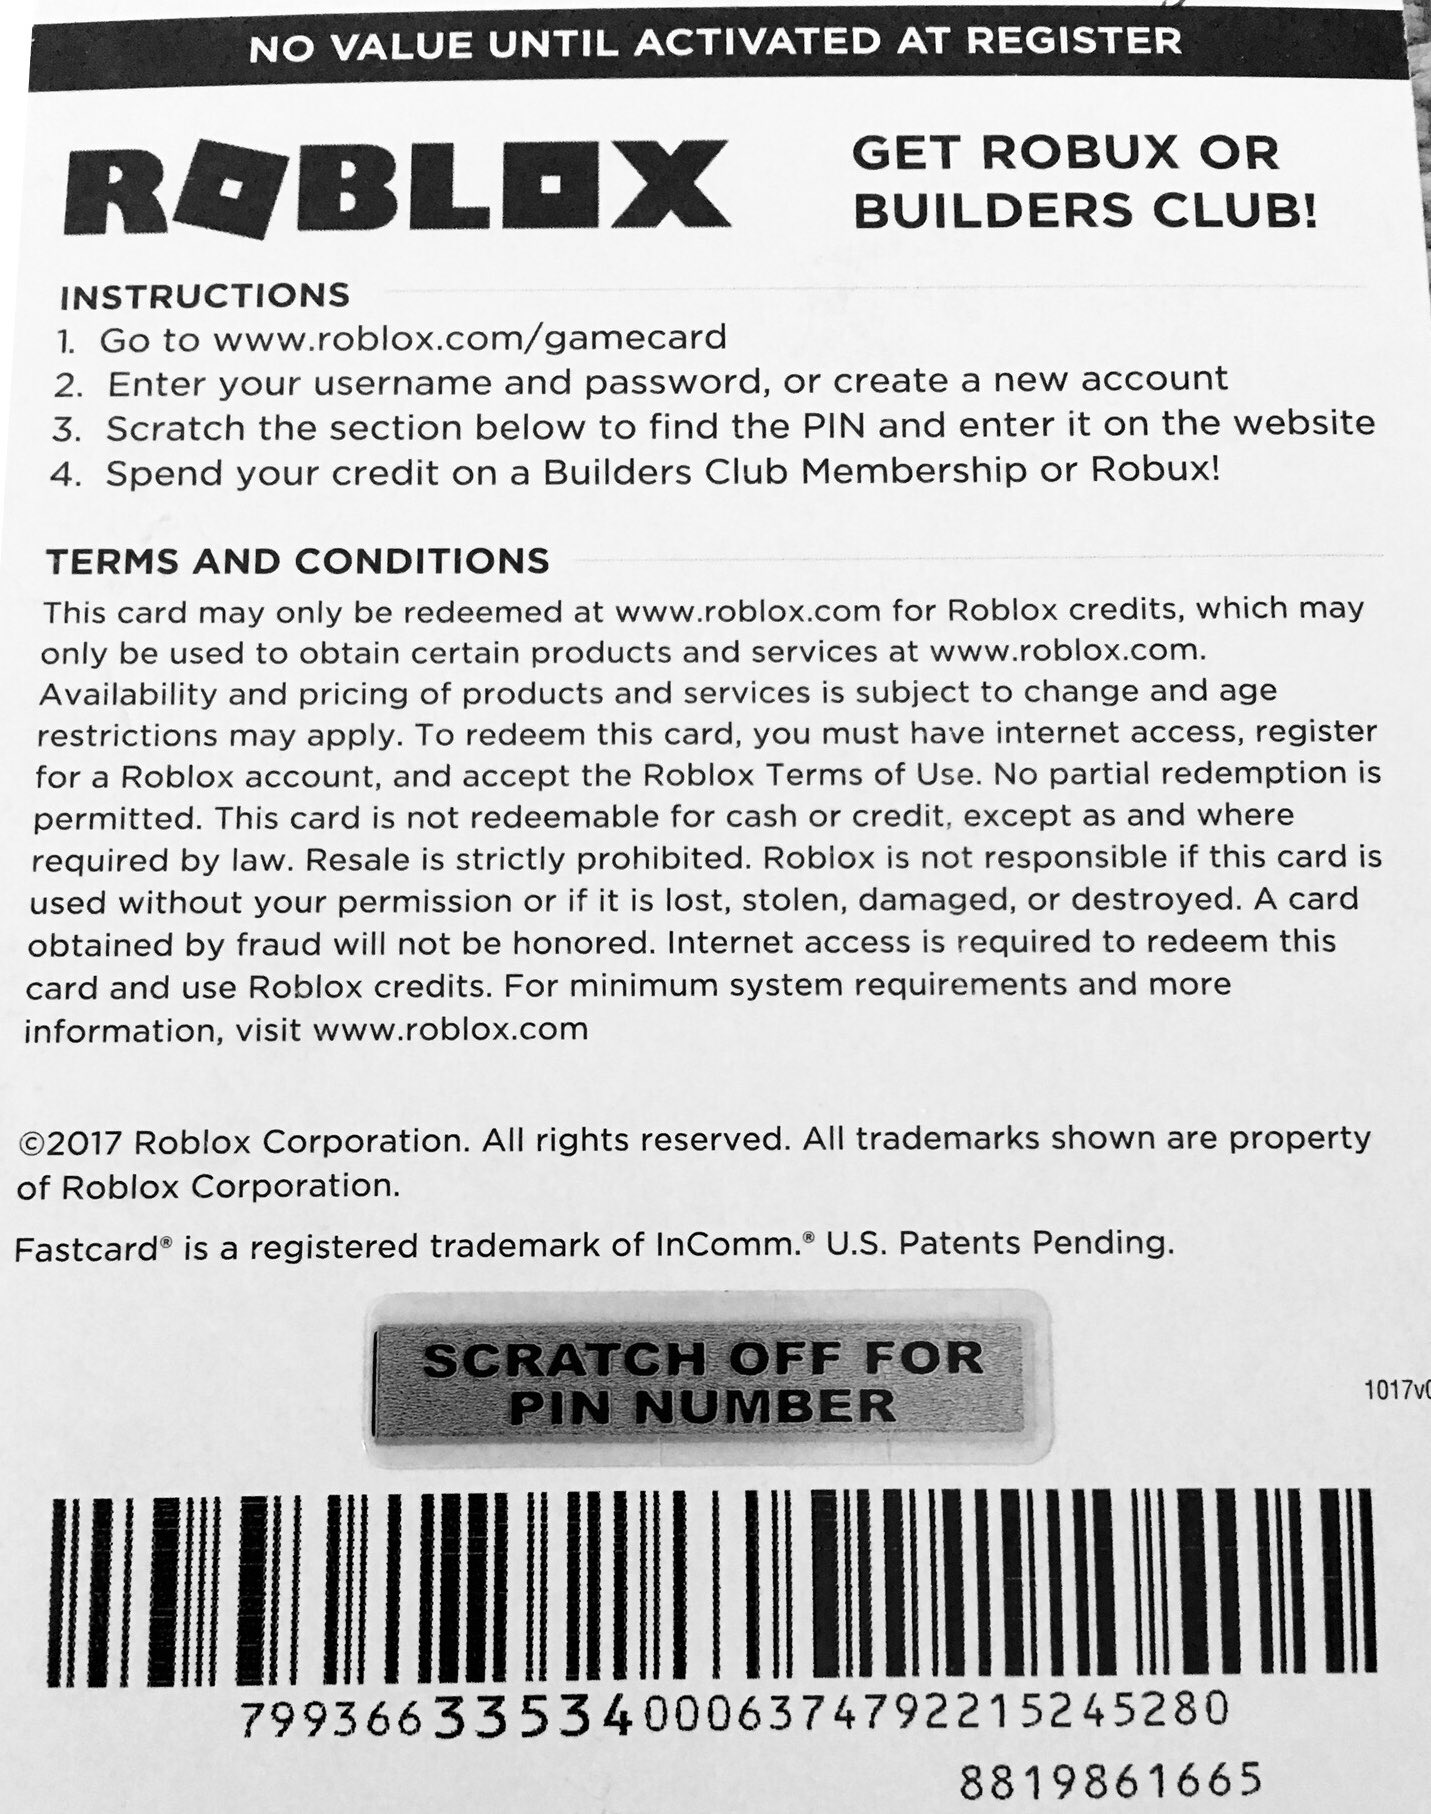 Teh Ghostz Giveaway Ended On Twitter 50 Roblox Card Giveaway To Enter Rt Like Tag 5 Friends Not Me Send Me Friend Request At Roblox Ghostz Ninja Dm - roblox corporation value